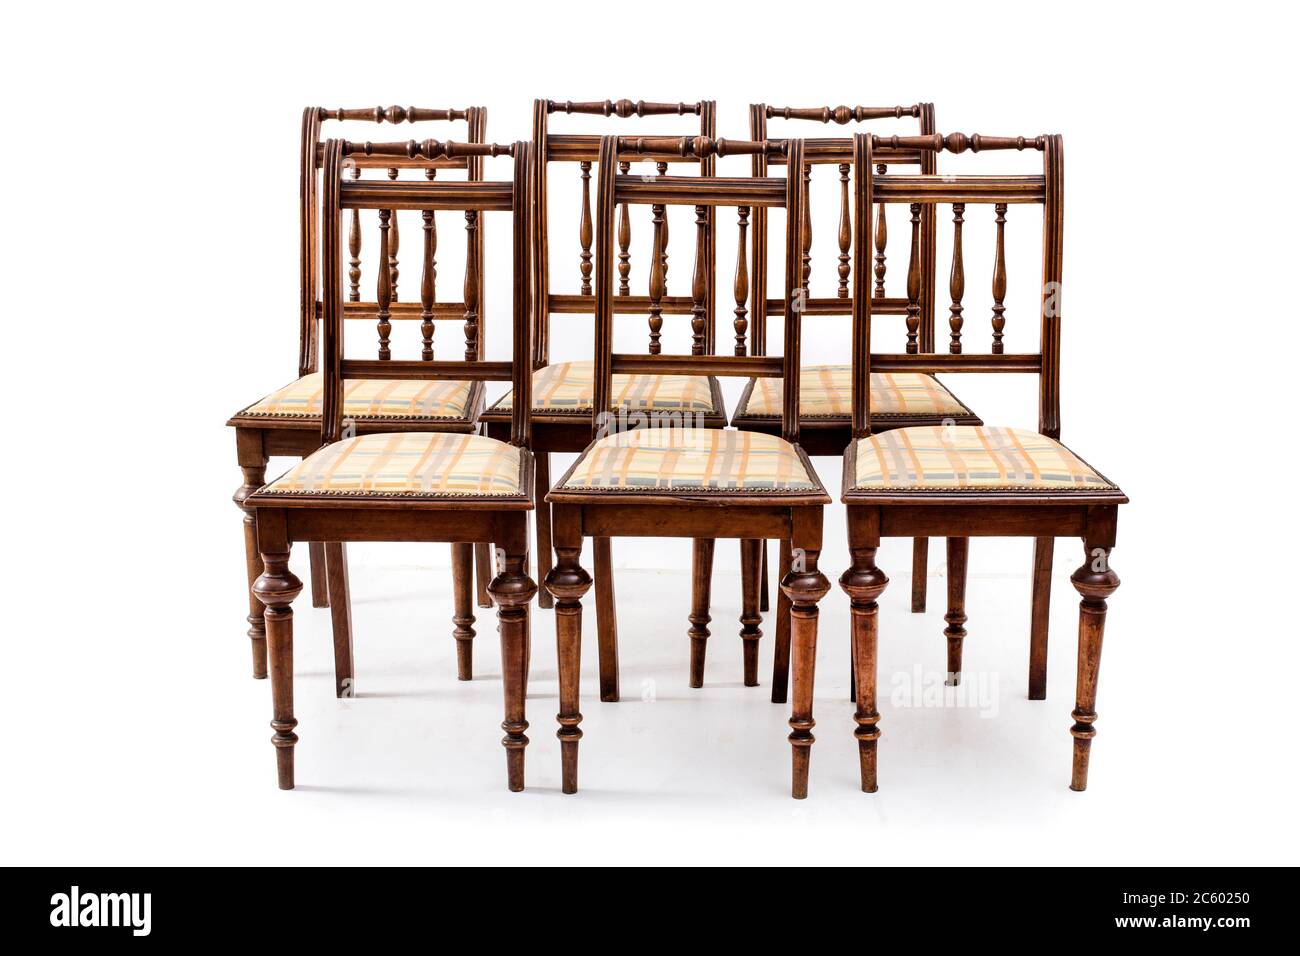 Group of old fashioned wood chairs on the white background. Stock Photo